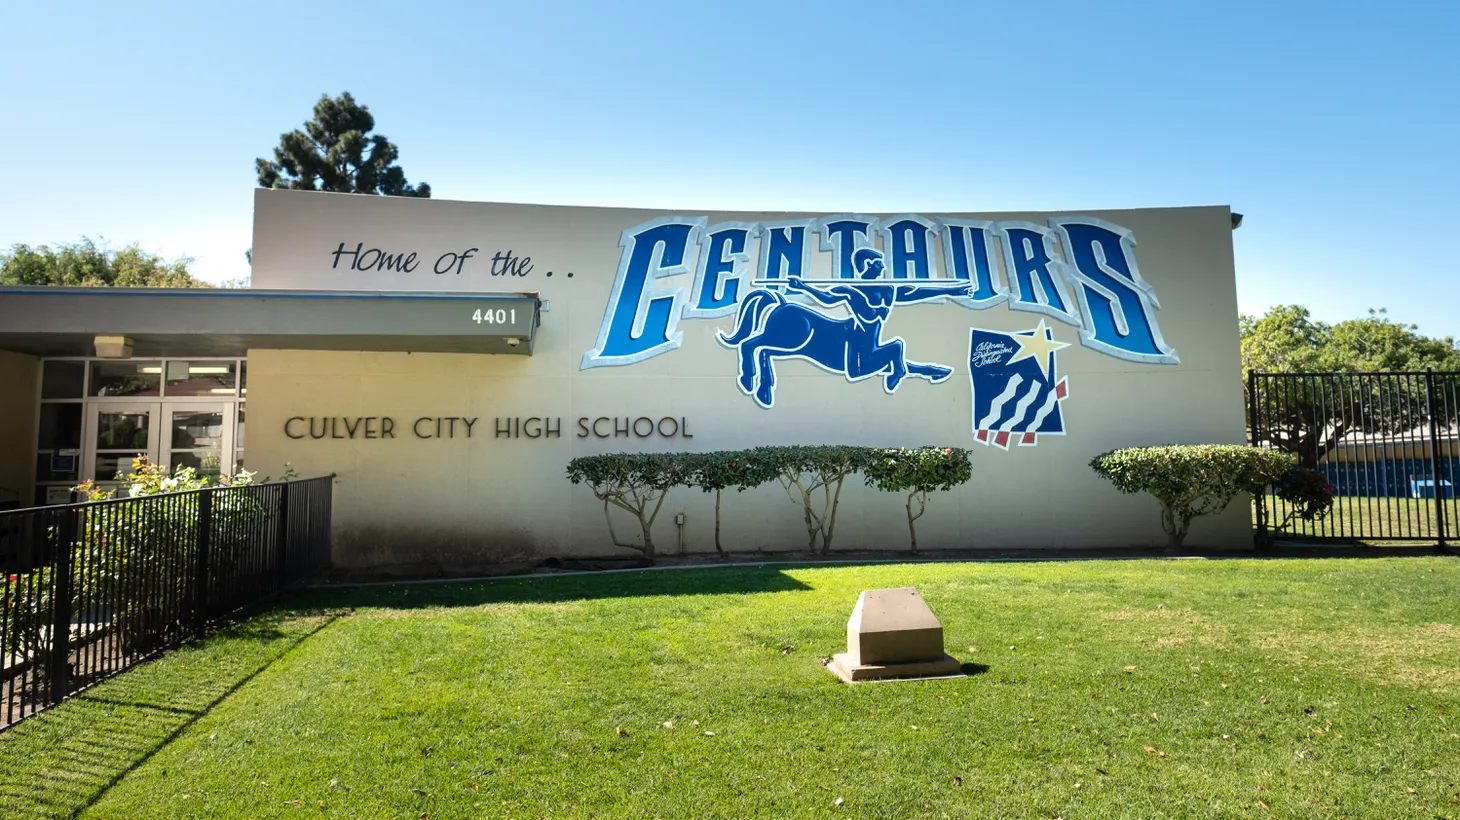 Culver City High School is home to the Centaurs.